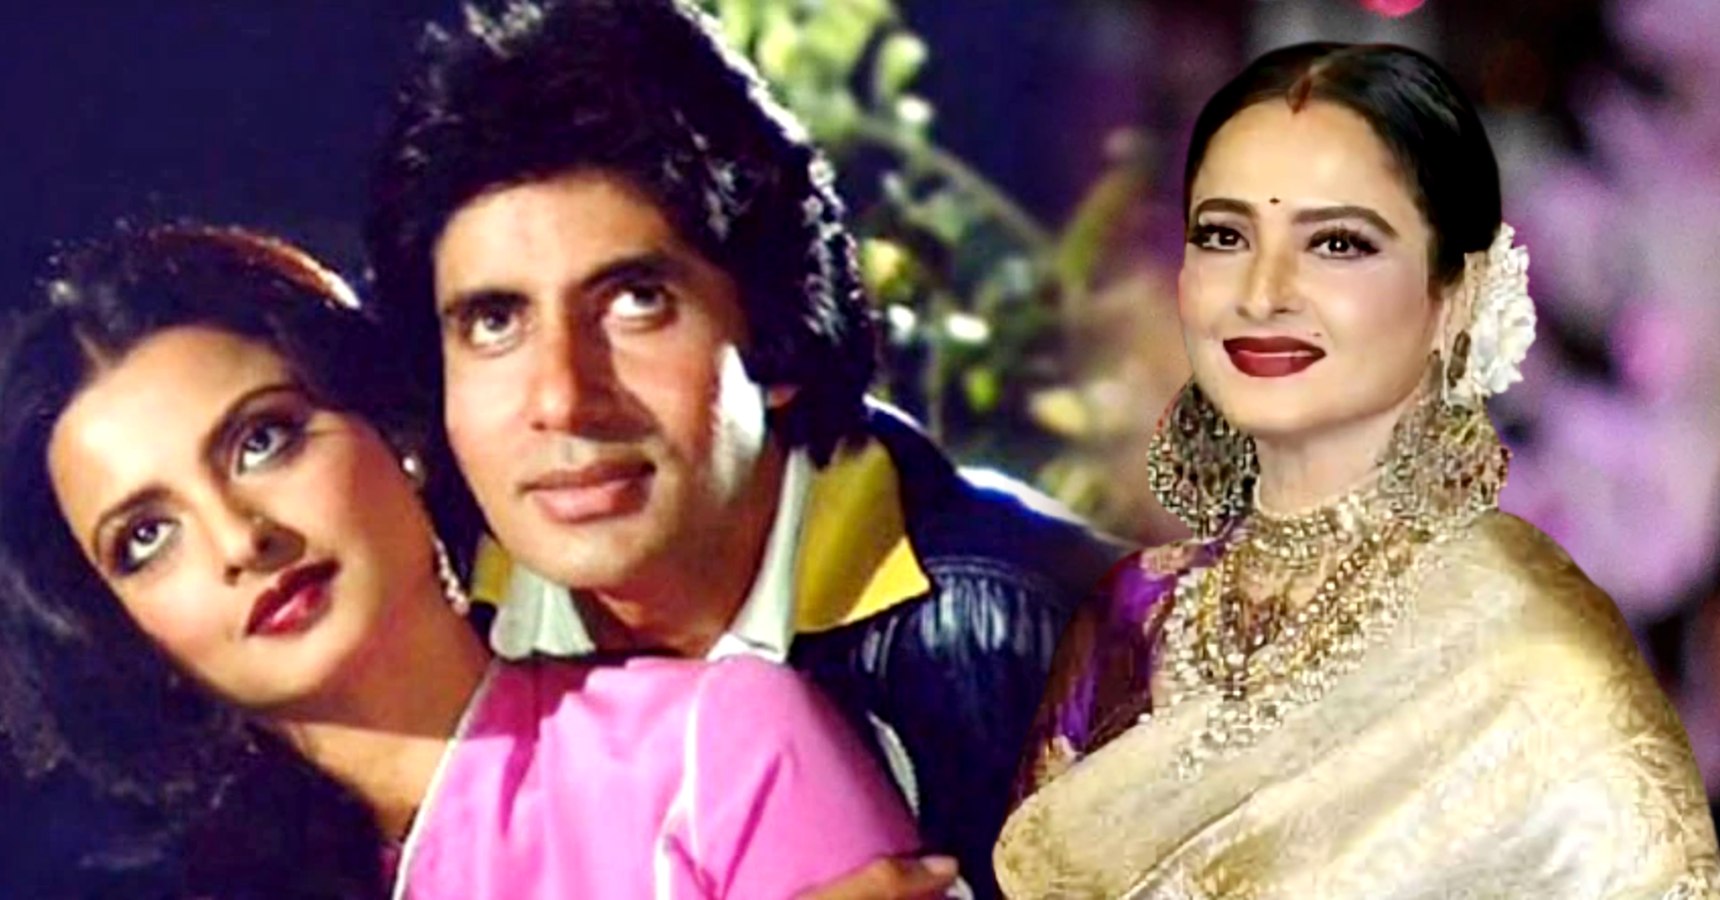 When Rekha expressed her love for Amitabh Bachchan in Simi Garewal’s show